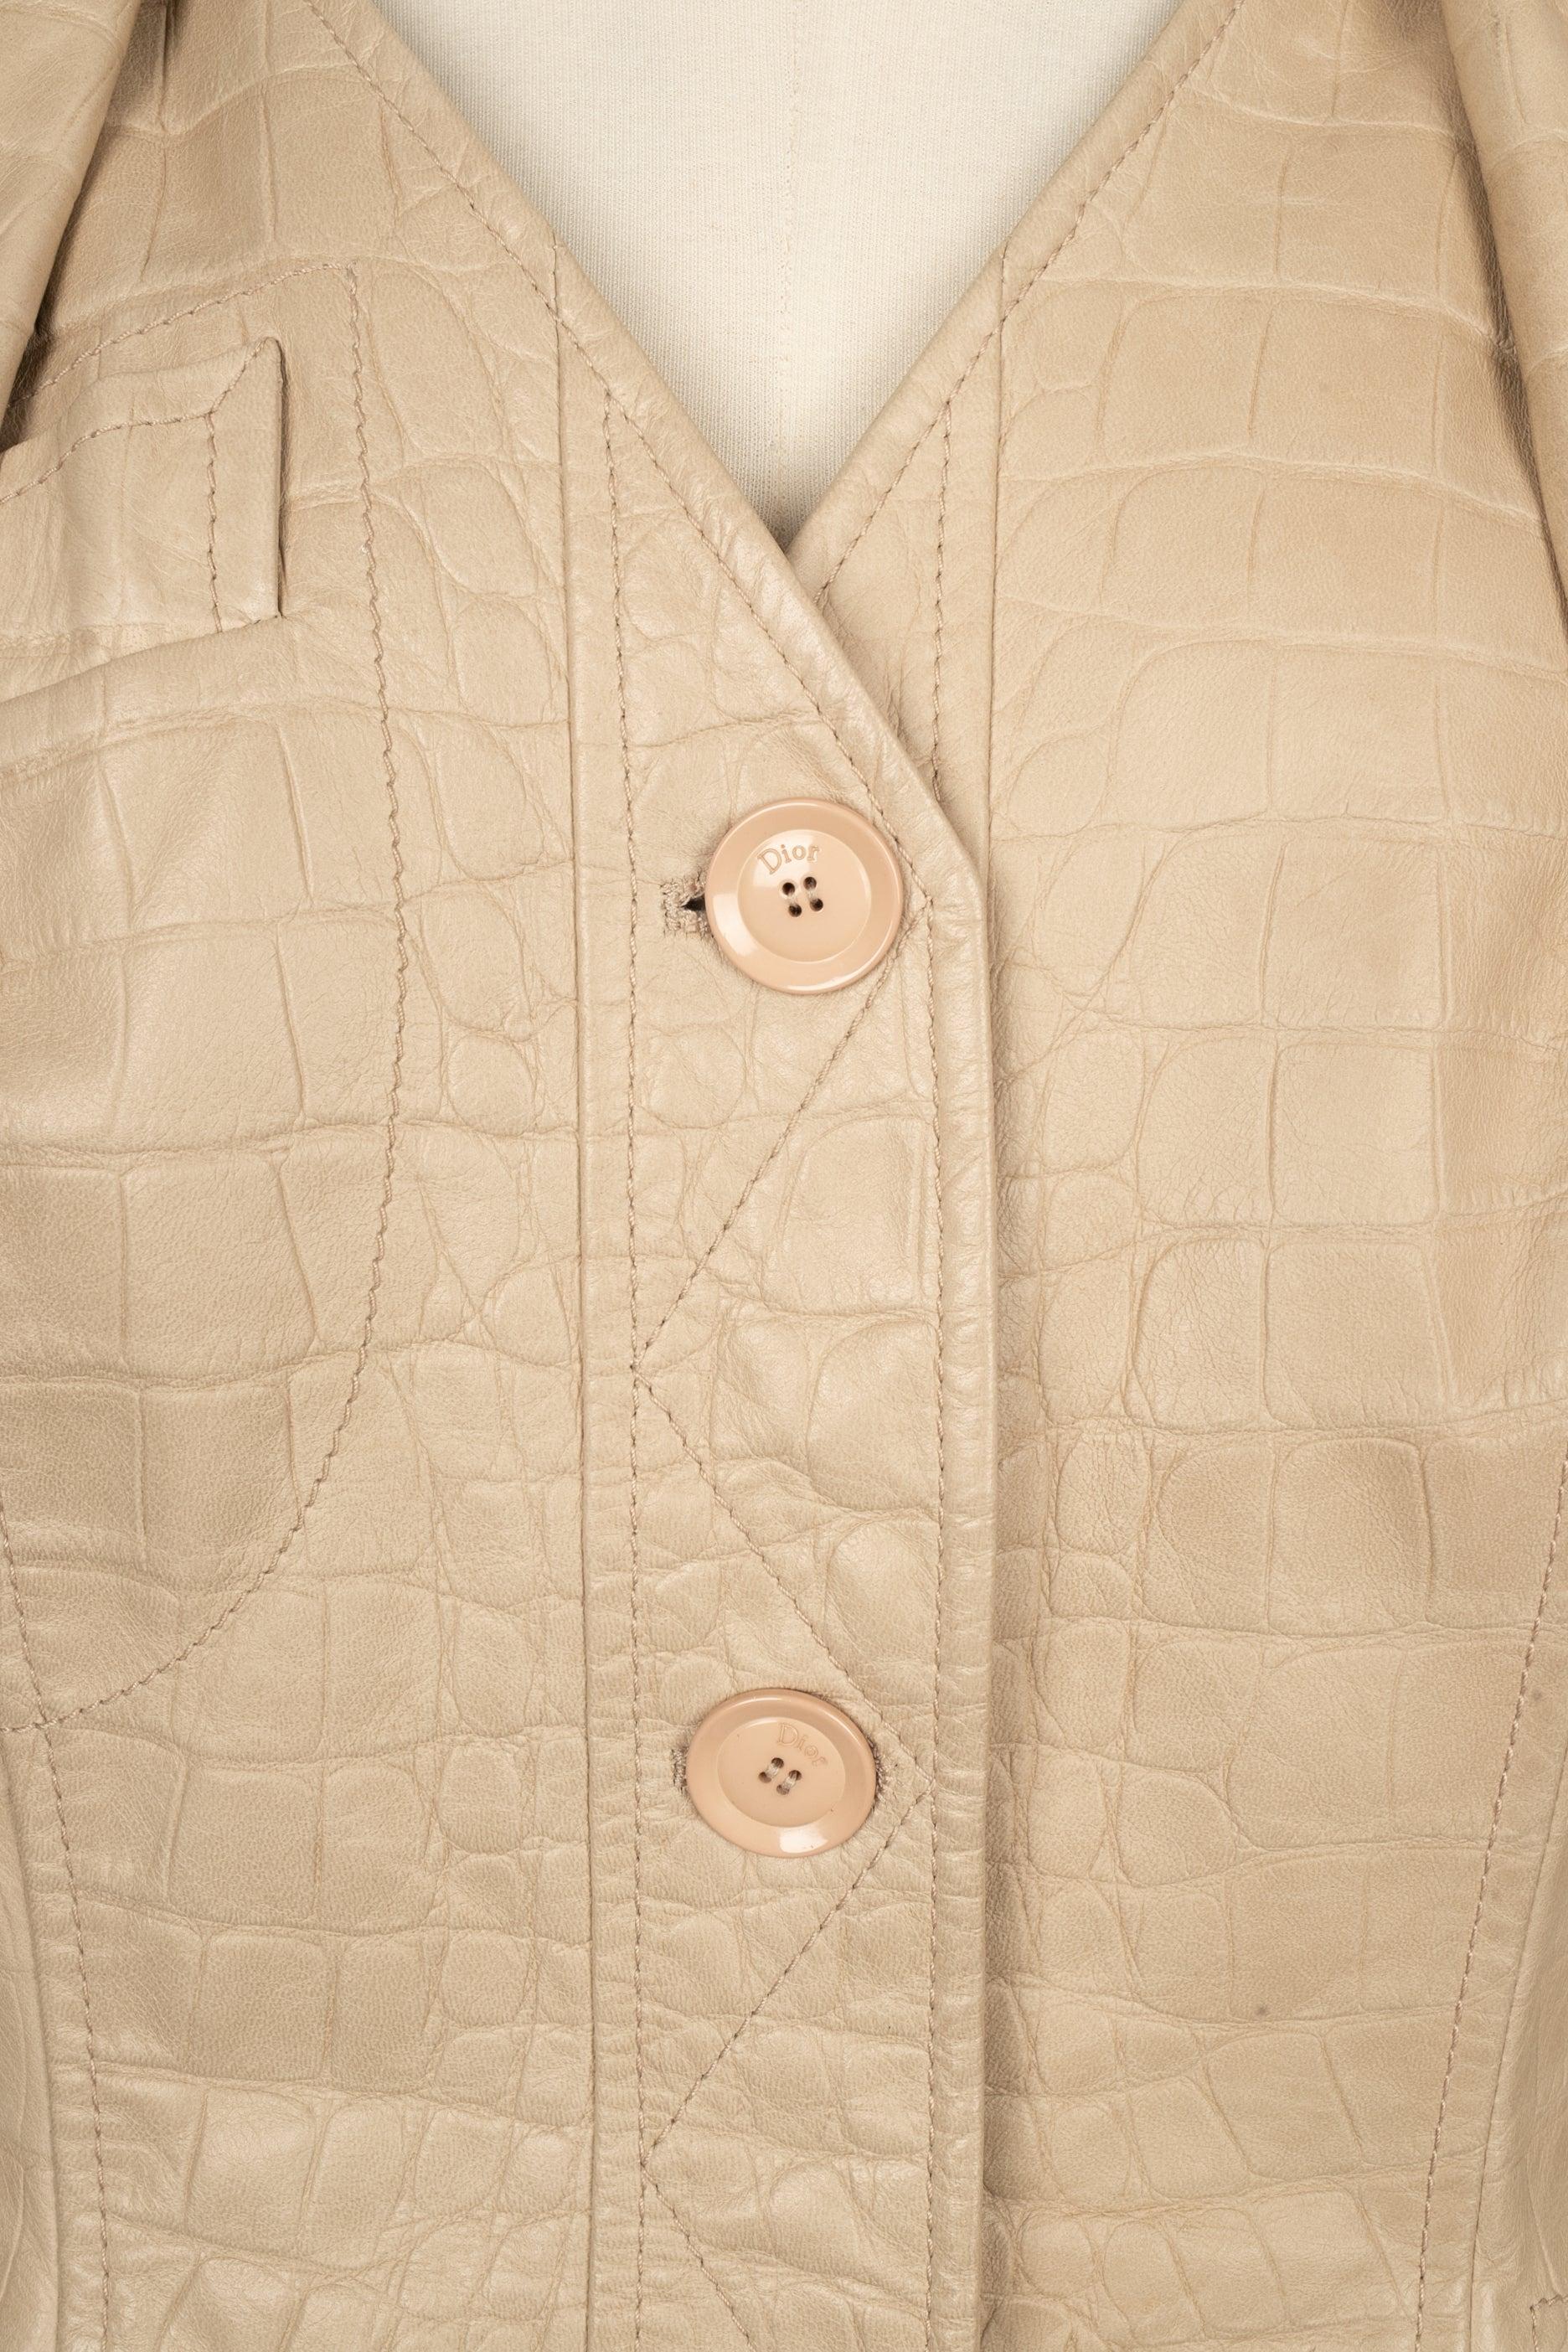 Dior Lamb Leather Jacket with Crocodile Print in Beige Tones, 2005 For Sale 2